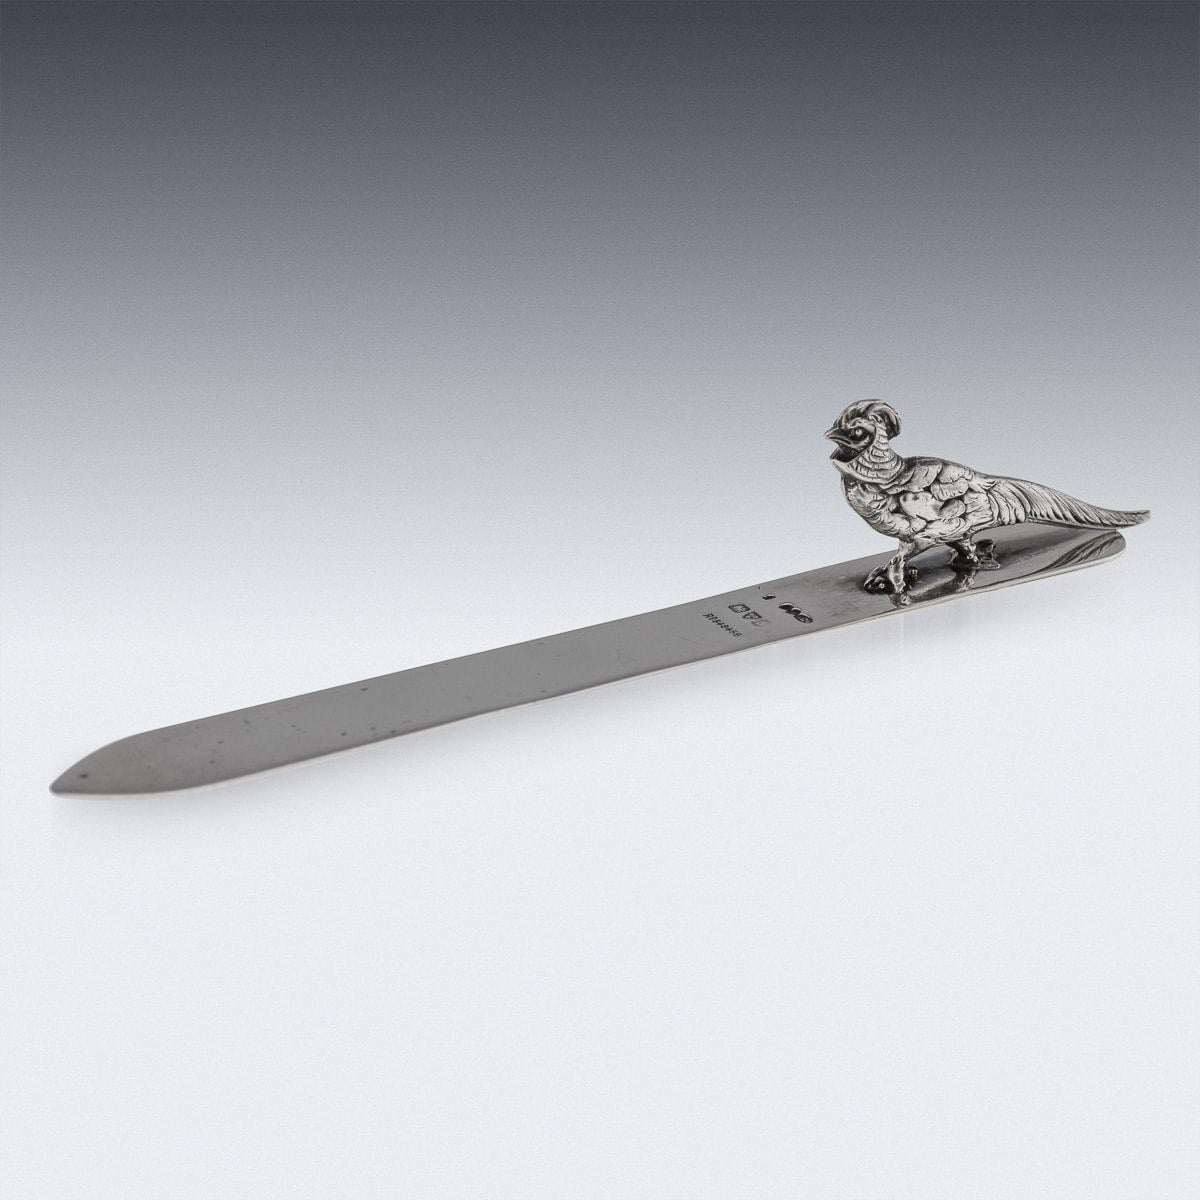 Other Antique 20th Century English Solid Silver Bookmark By Sampson Mordan & Co c.1918 For Sale